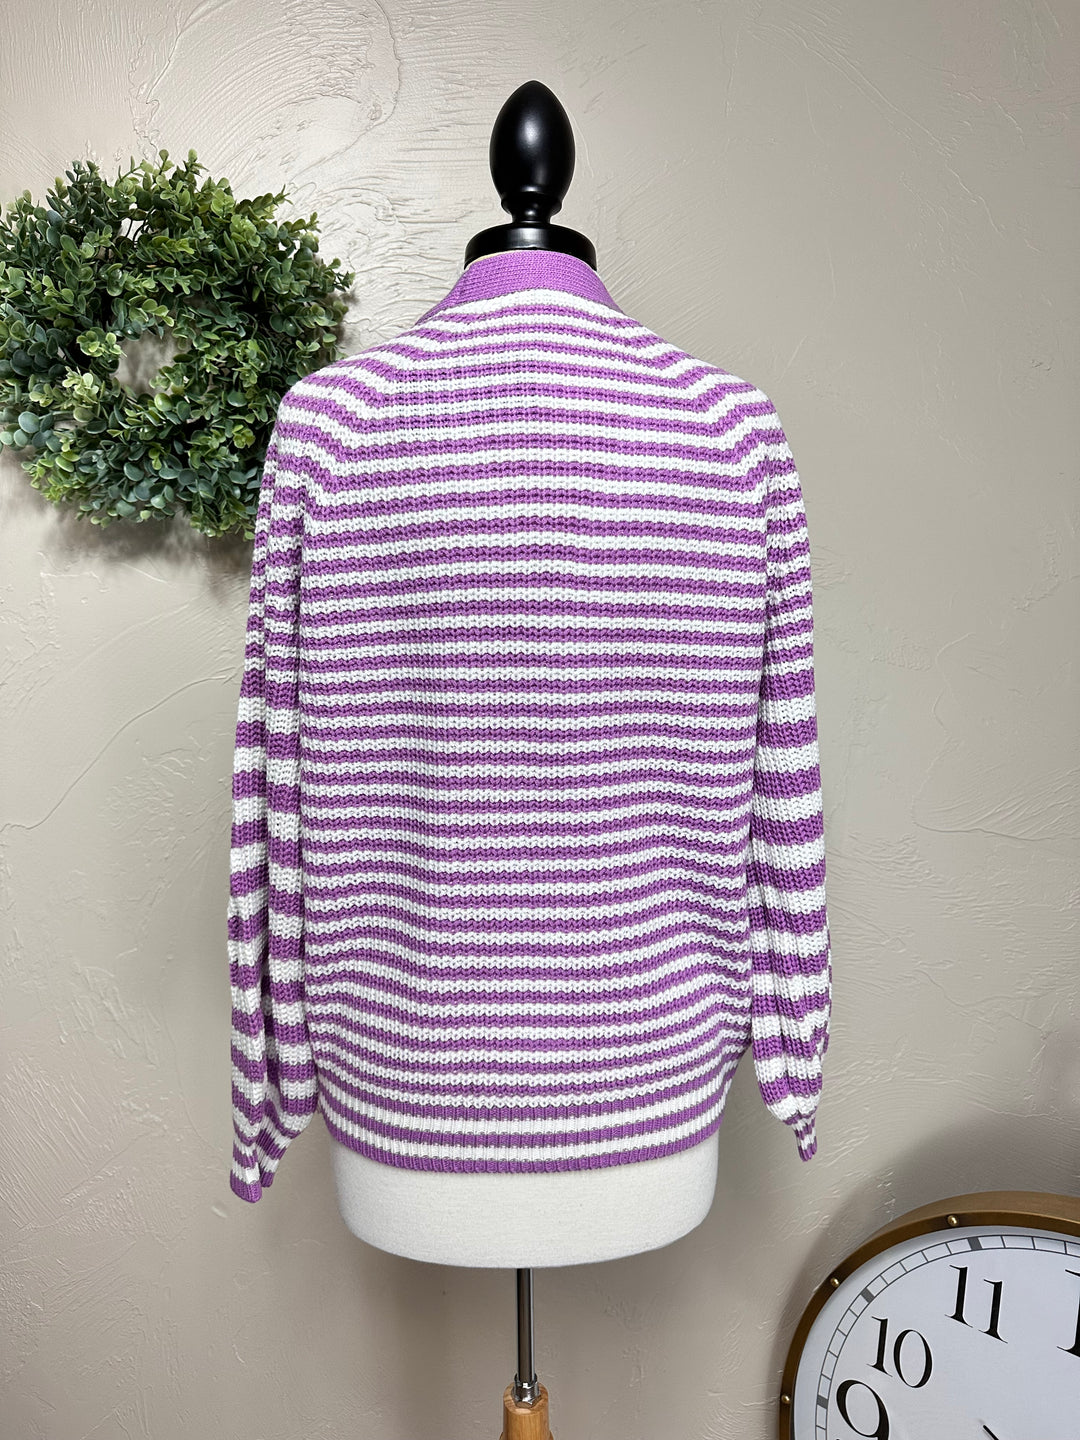 Liza's Striped Orchid Button Up Cardigan Sweater